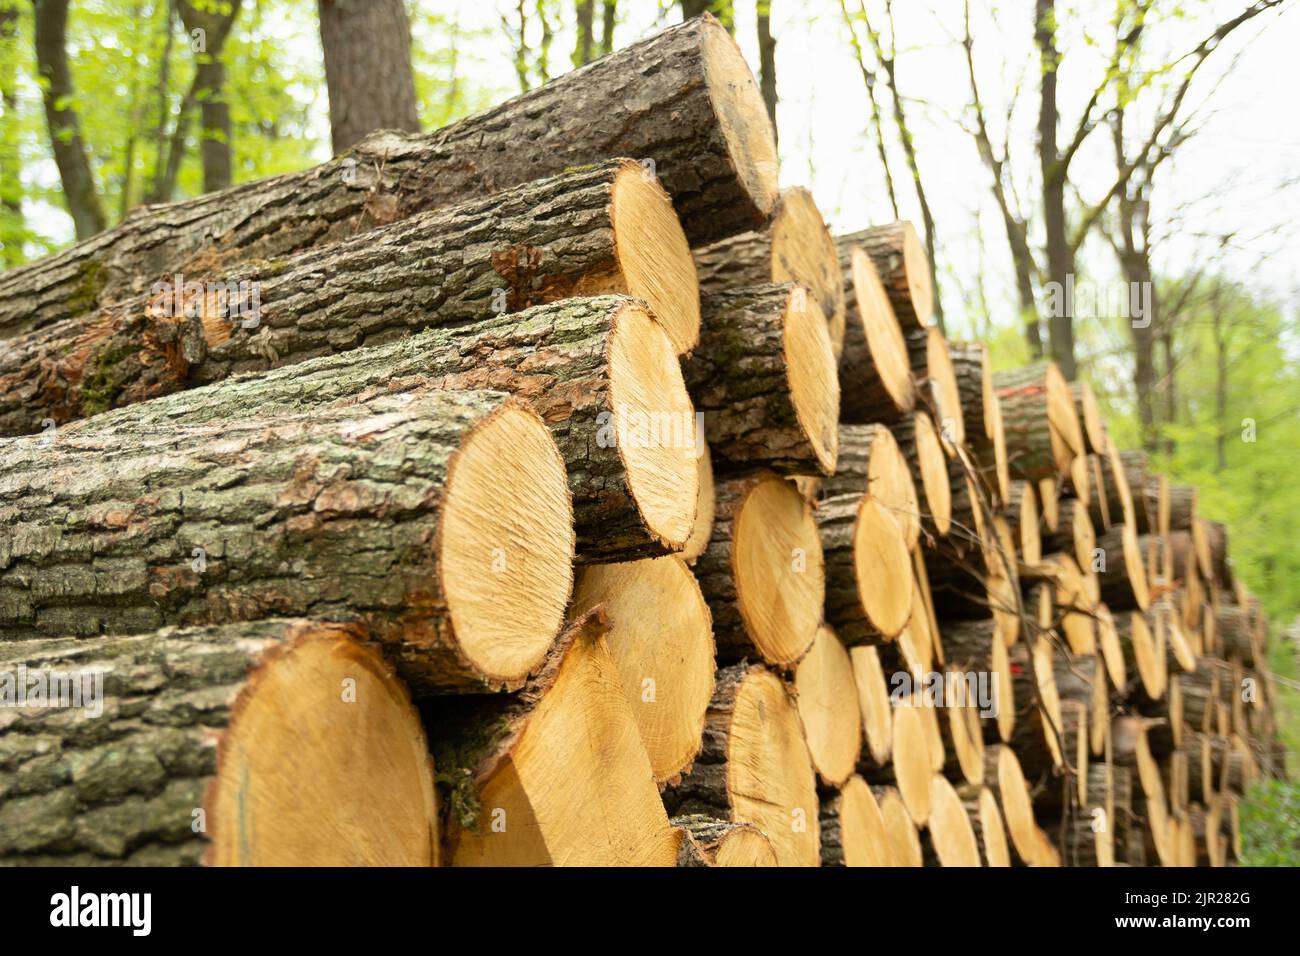 A pile of tree trunks from the forest clearings, close up Stock Photo